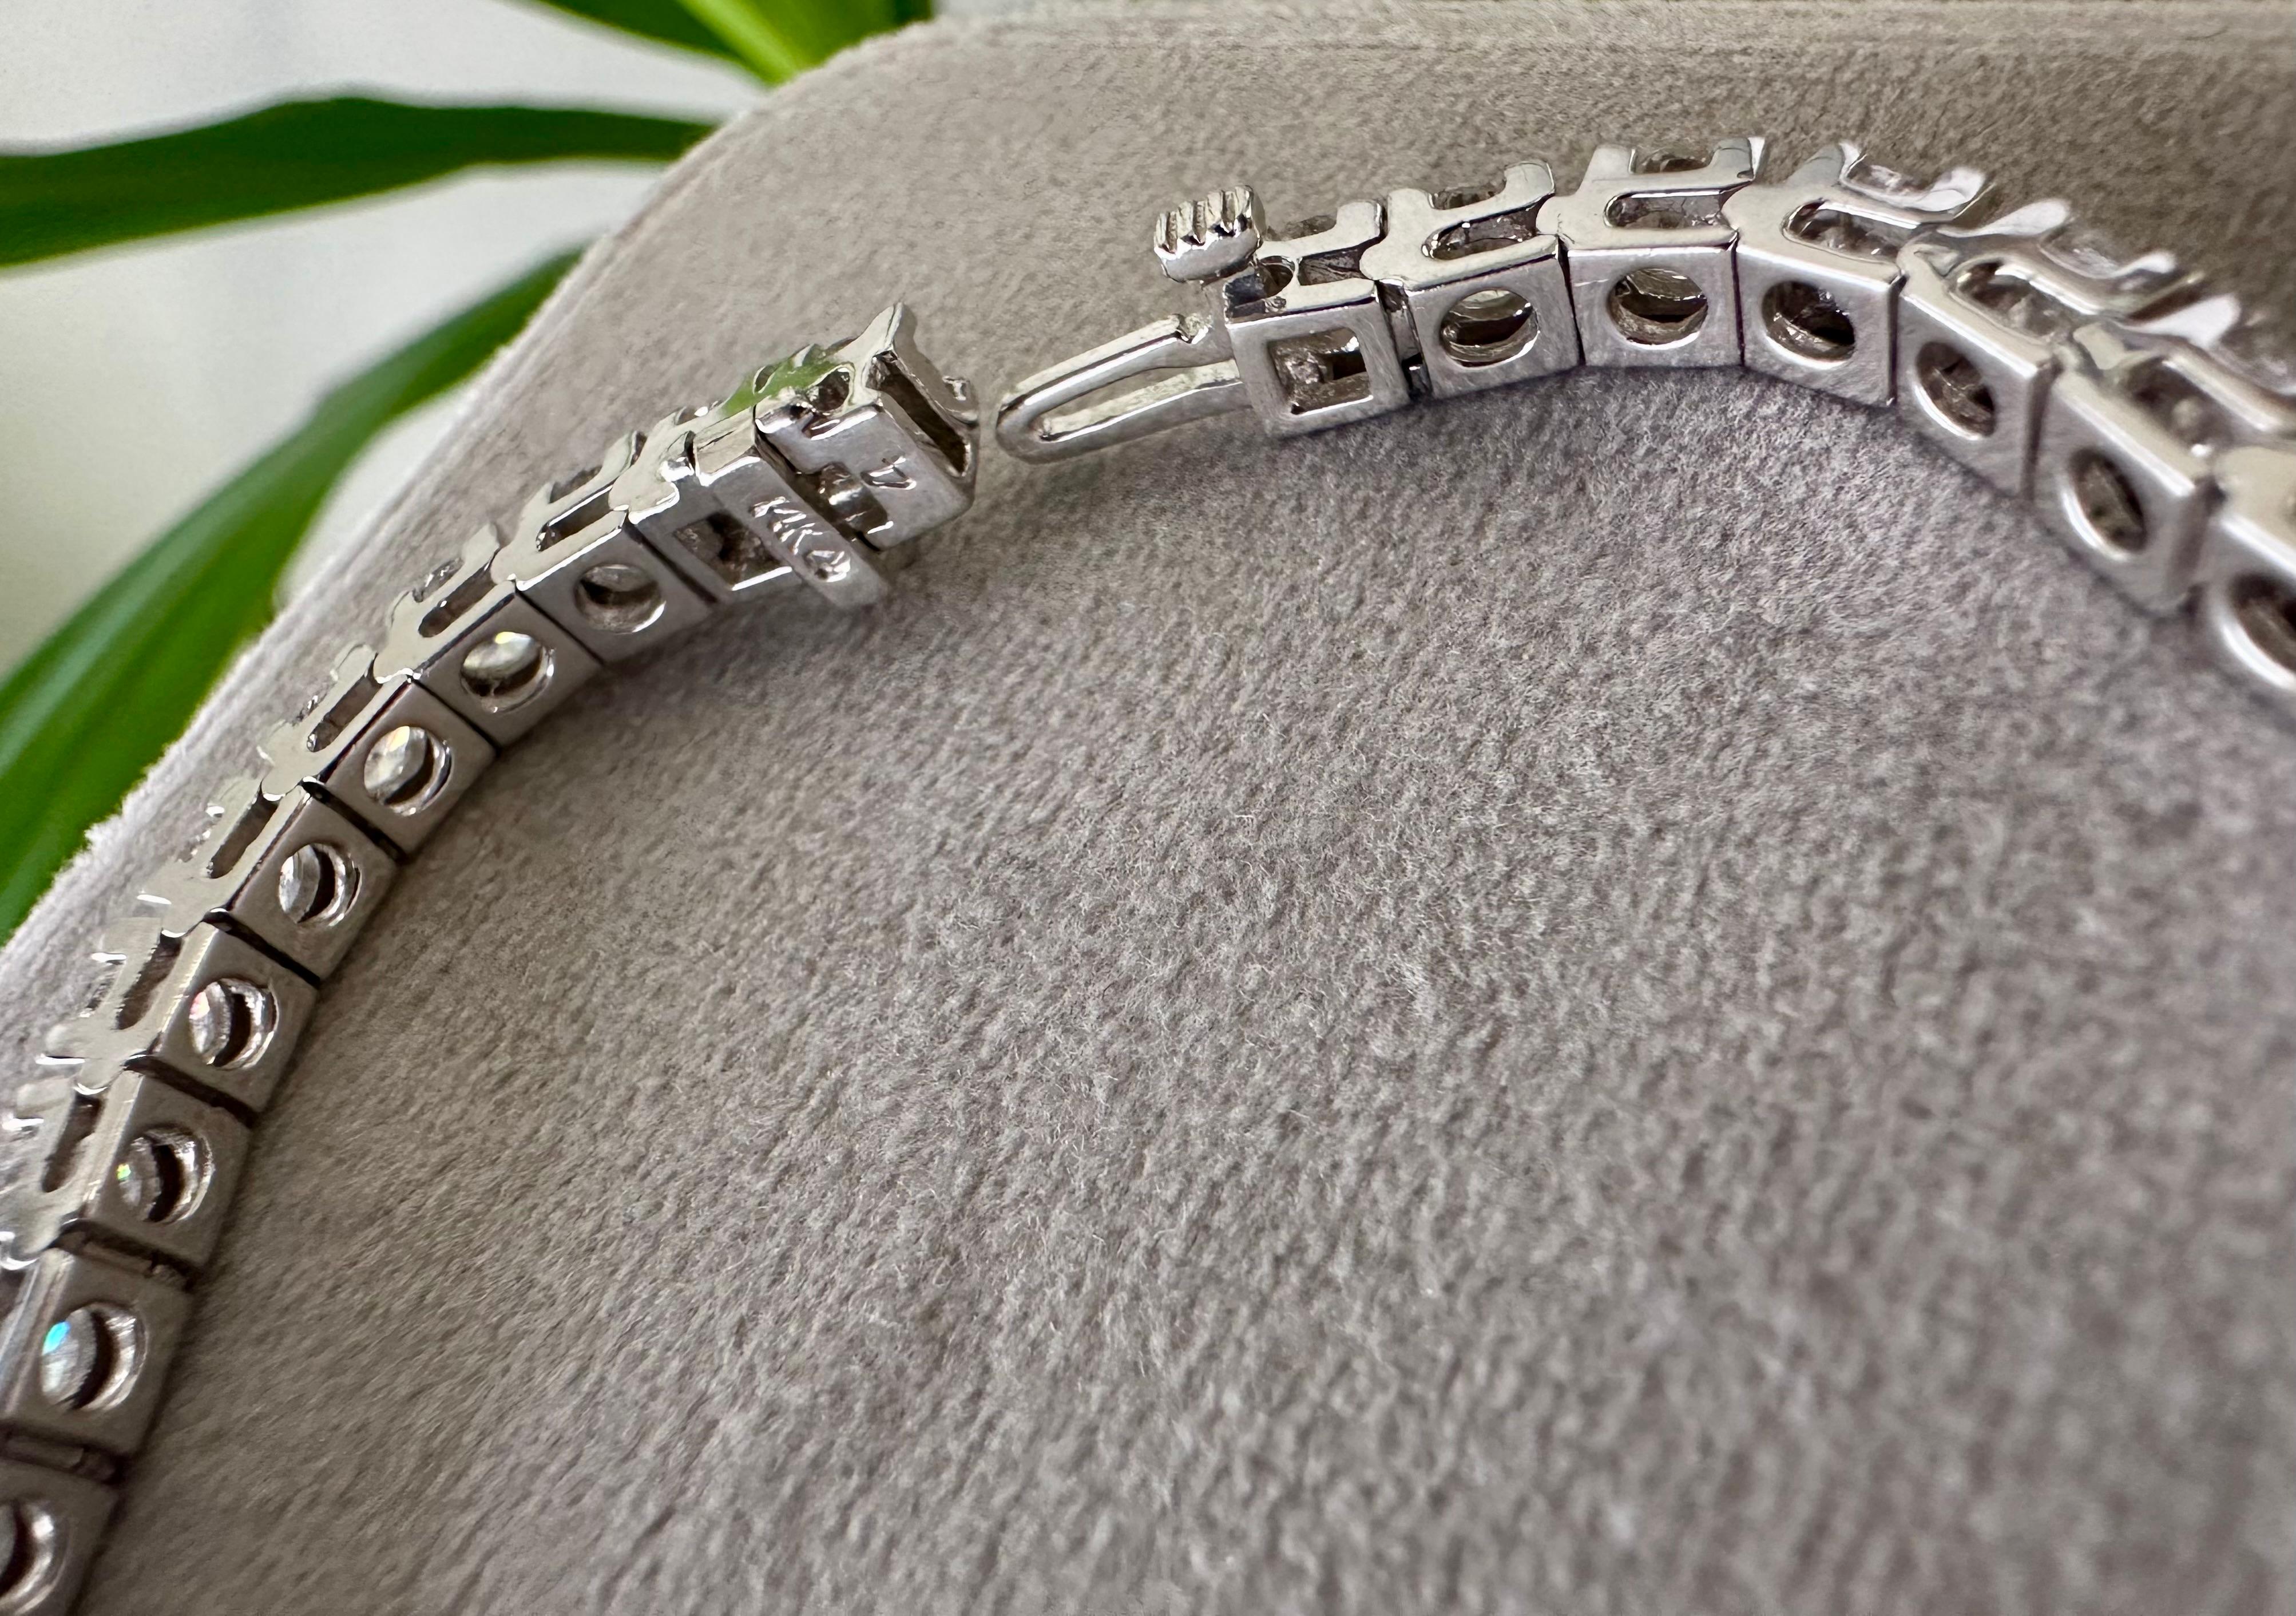 Big look tennis bracelet.
Each diamond is a 0.25 carat.
Diamond color is G and clarity is SI.
Length is 7